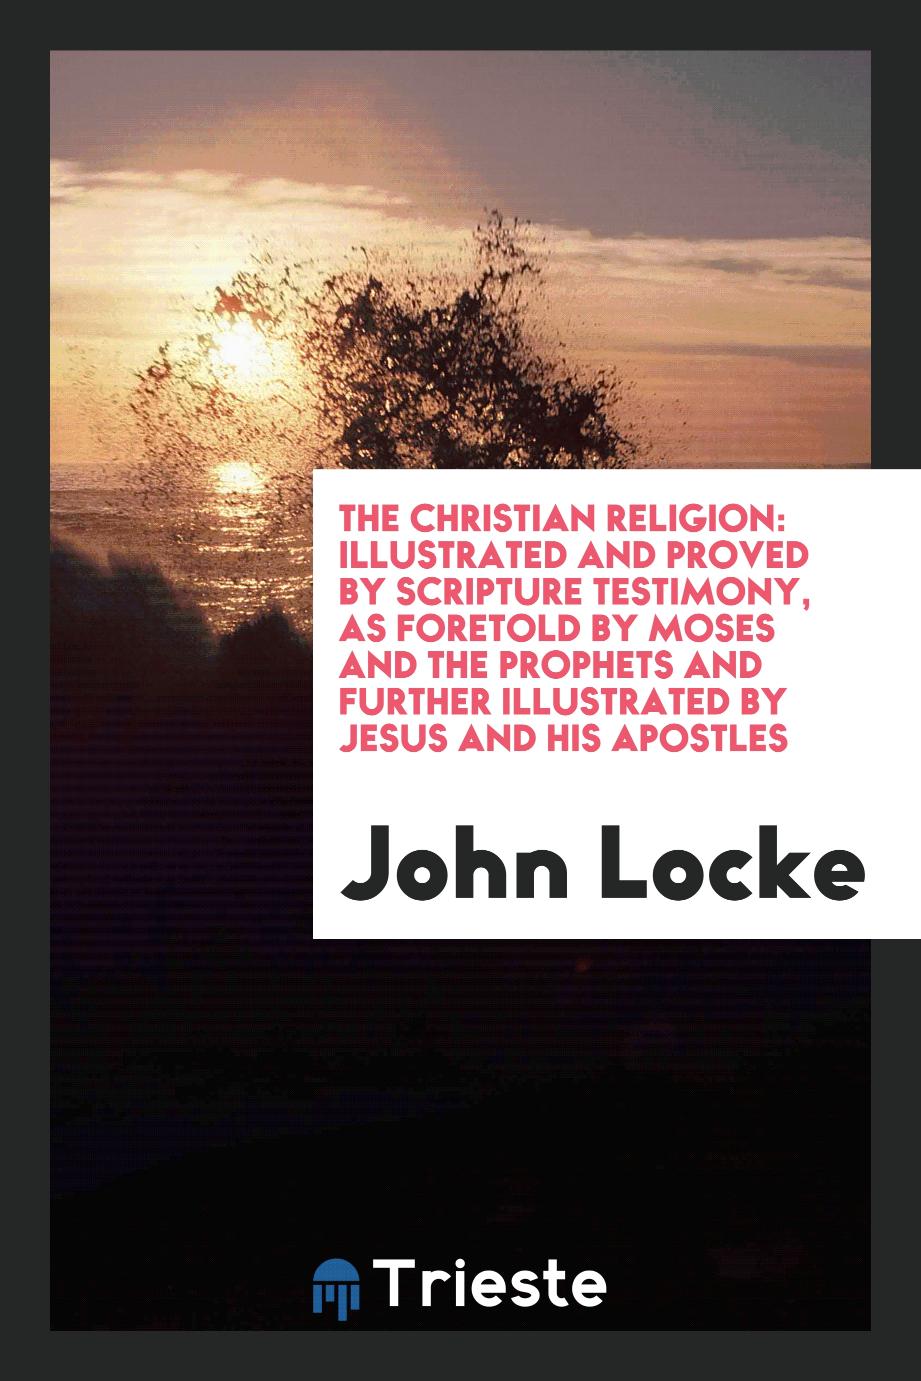 The Christian Religion: Illustrated and Proved by Scripture Testimony, as Foretold by Moses and the Prophets and Further Illustrated by Jesus and His Apostles